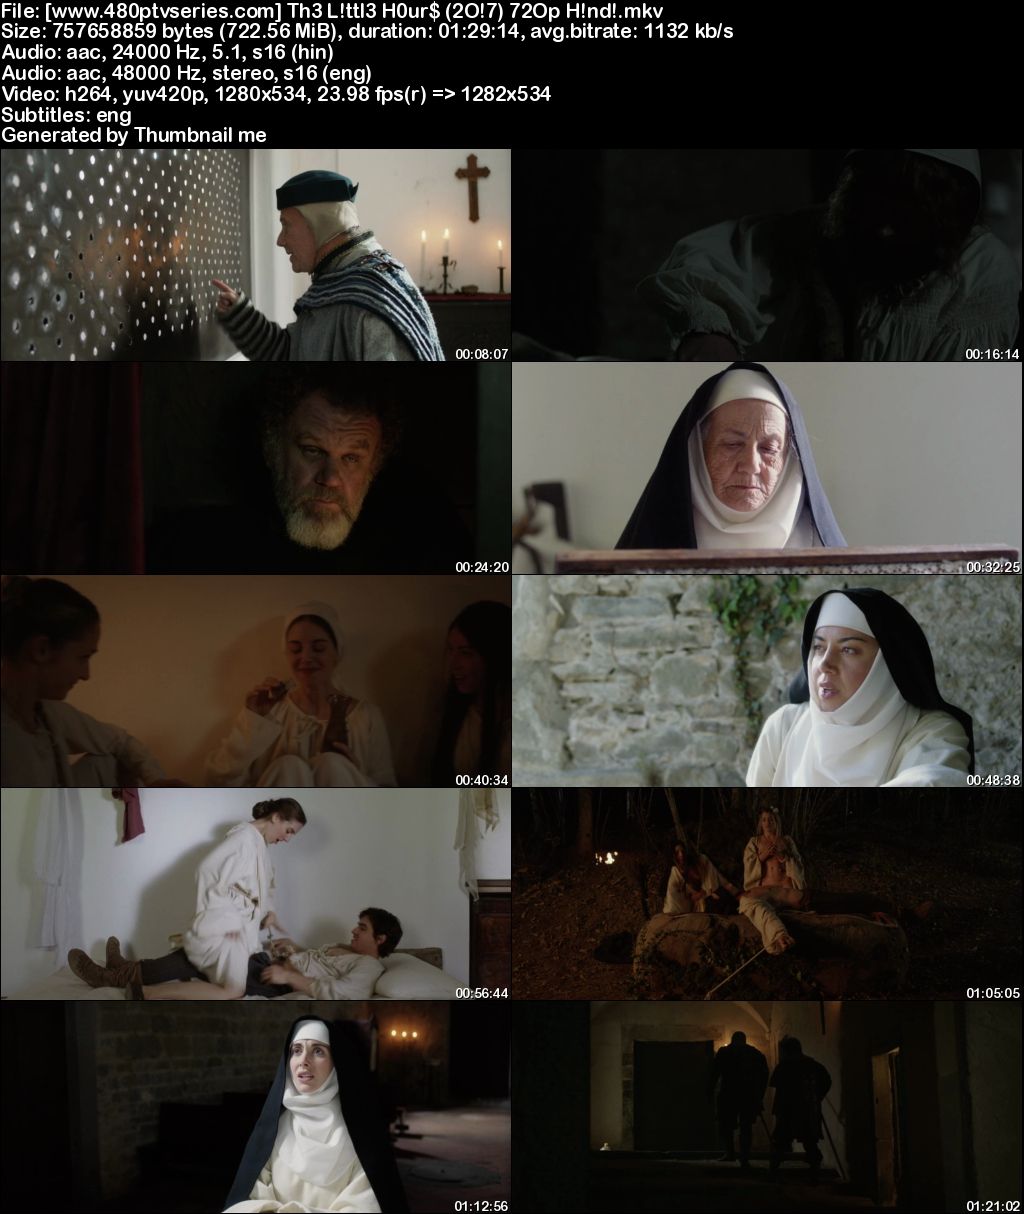 [18+] The Little Hours (2017) Full Hindi Dual Audio Movie